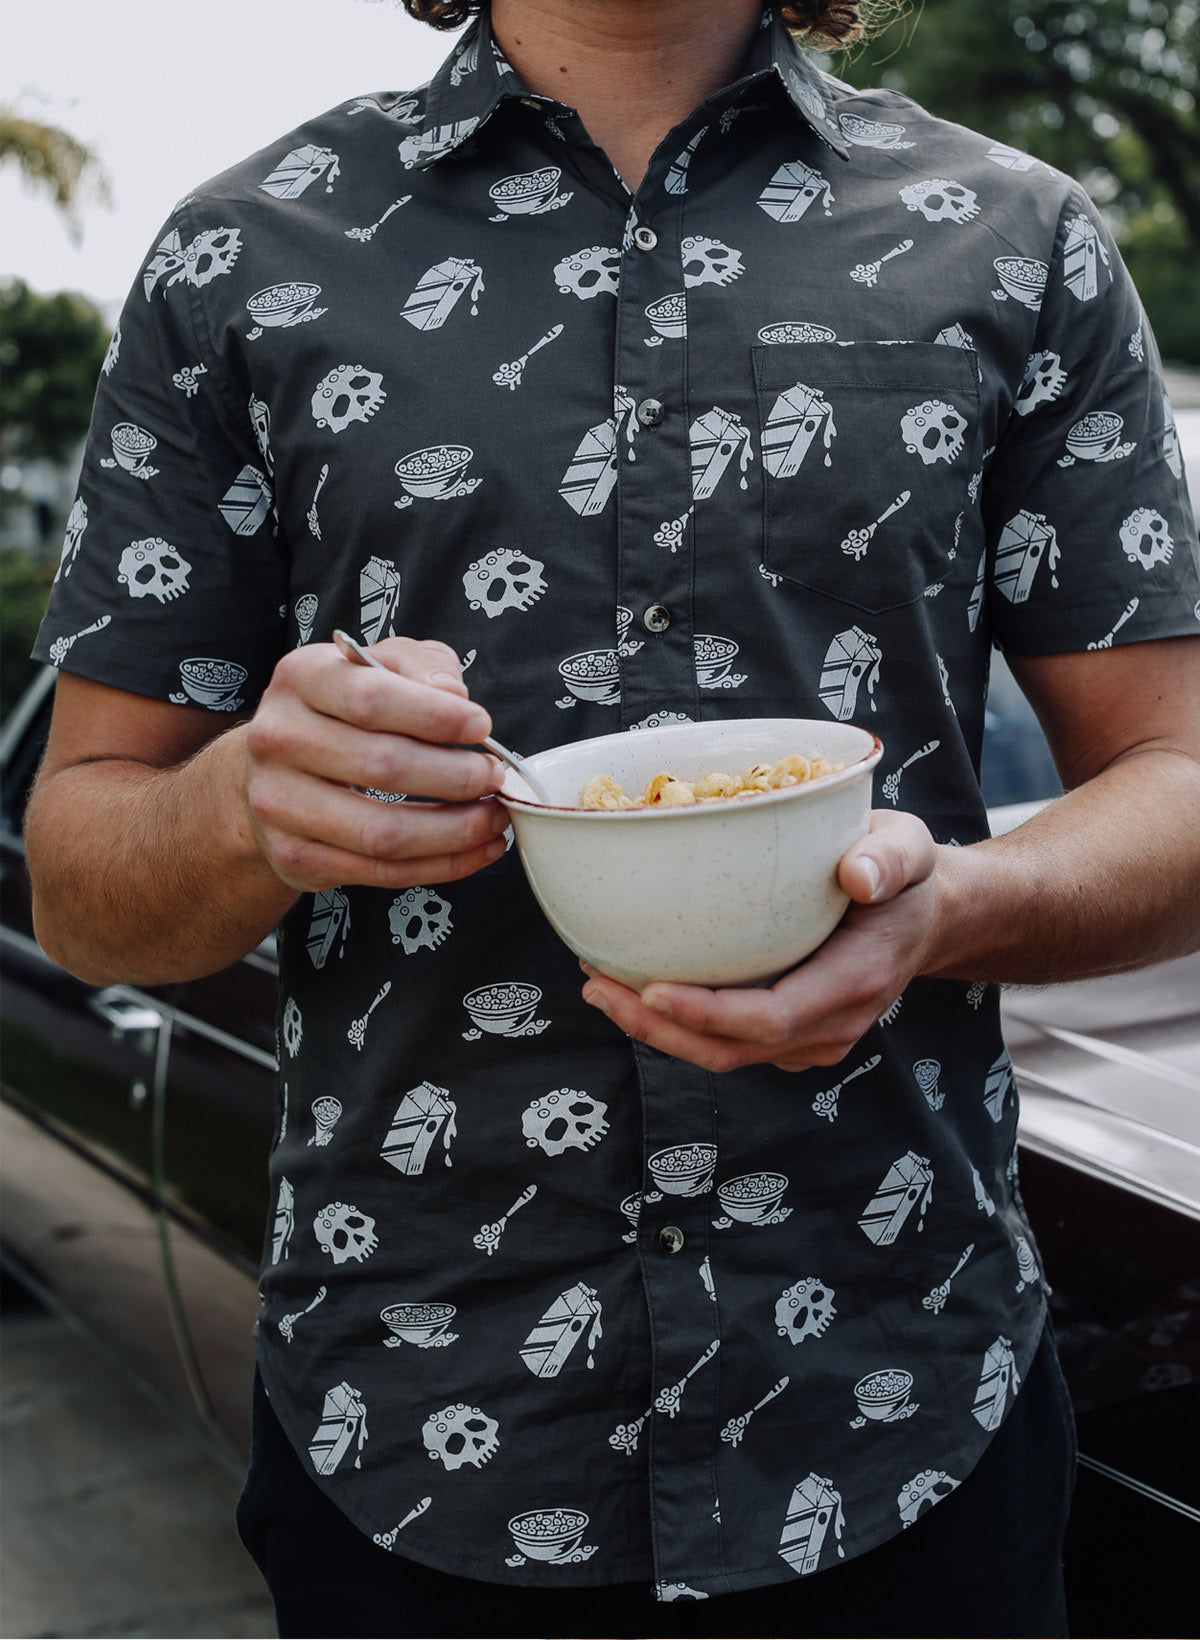 Pyknic | Cereal Killer Vacation Casual Button-Up Shirt | Button Down Shirt with All Over Graphic Print, Cereal Bowl and Milk Shirt, Cool Food Shirt, Best Foodie Shirt, Best Foodie Gift, Food Themed Apparel, Food Tattoo Flash, Skull Pattern Button Down Shirt, Cool Button Up Shirts, Alternative Lifestyle Brand, Motorcycle Lifestyle Brand, Breakfast Shirt